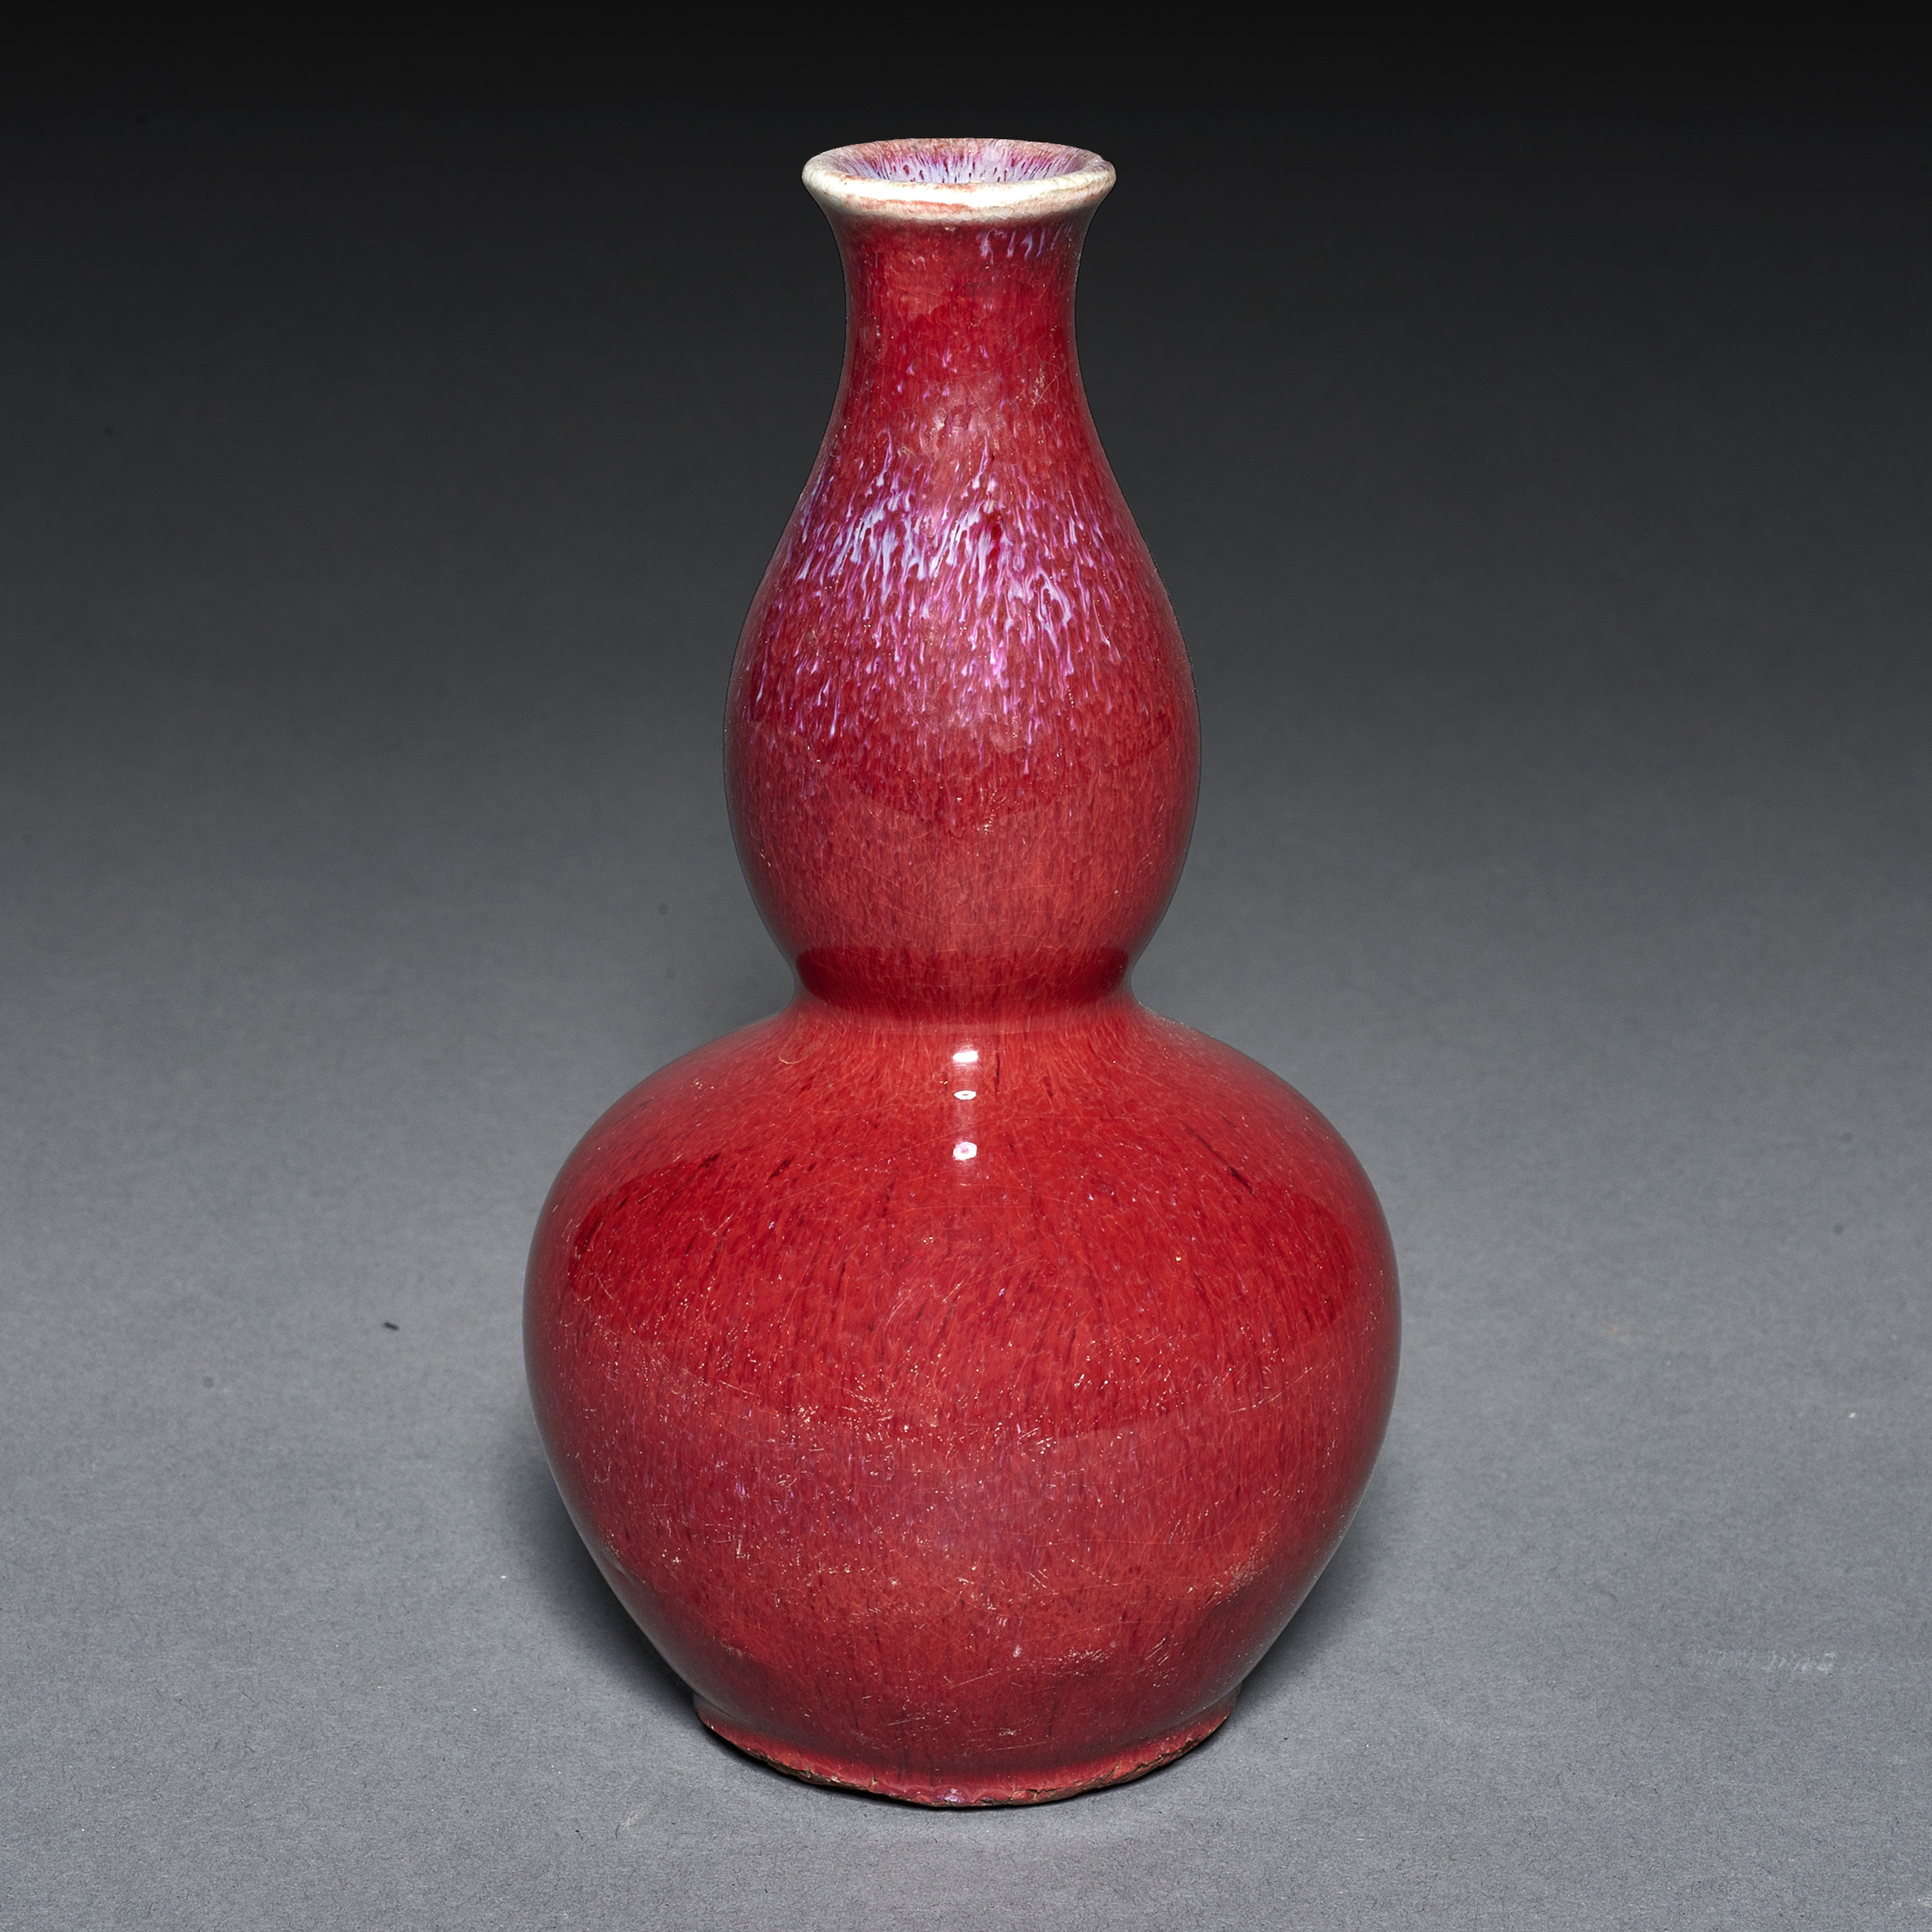 CHINESE FLAMBE GLAZED DOUBLE GOURD 3a496c